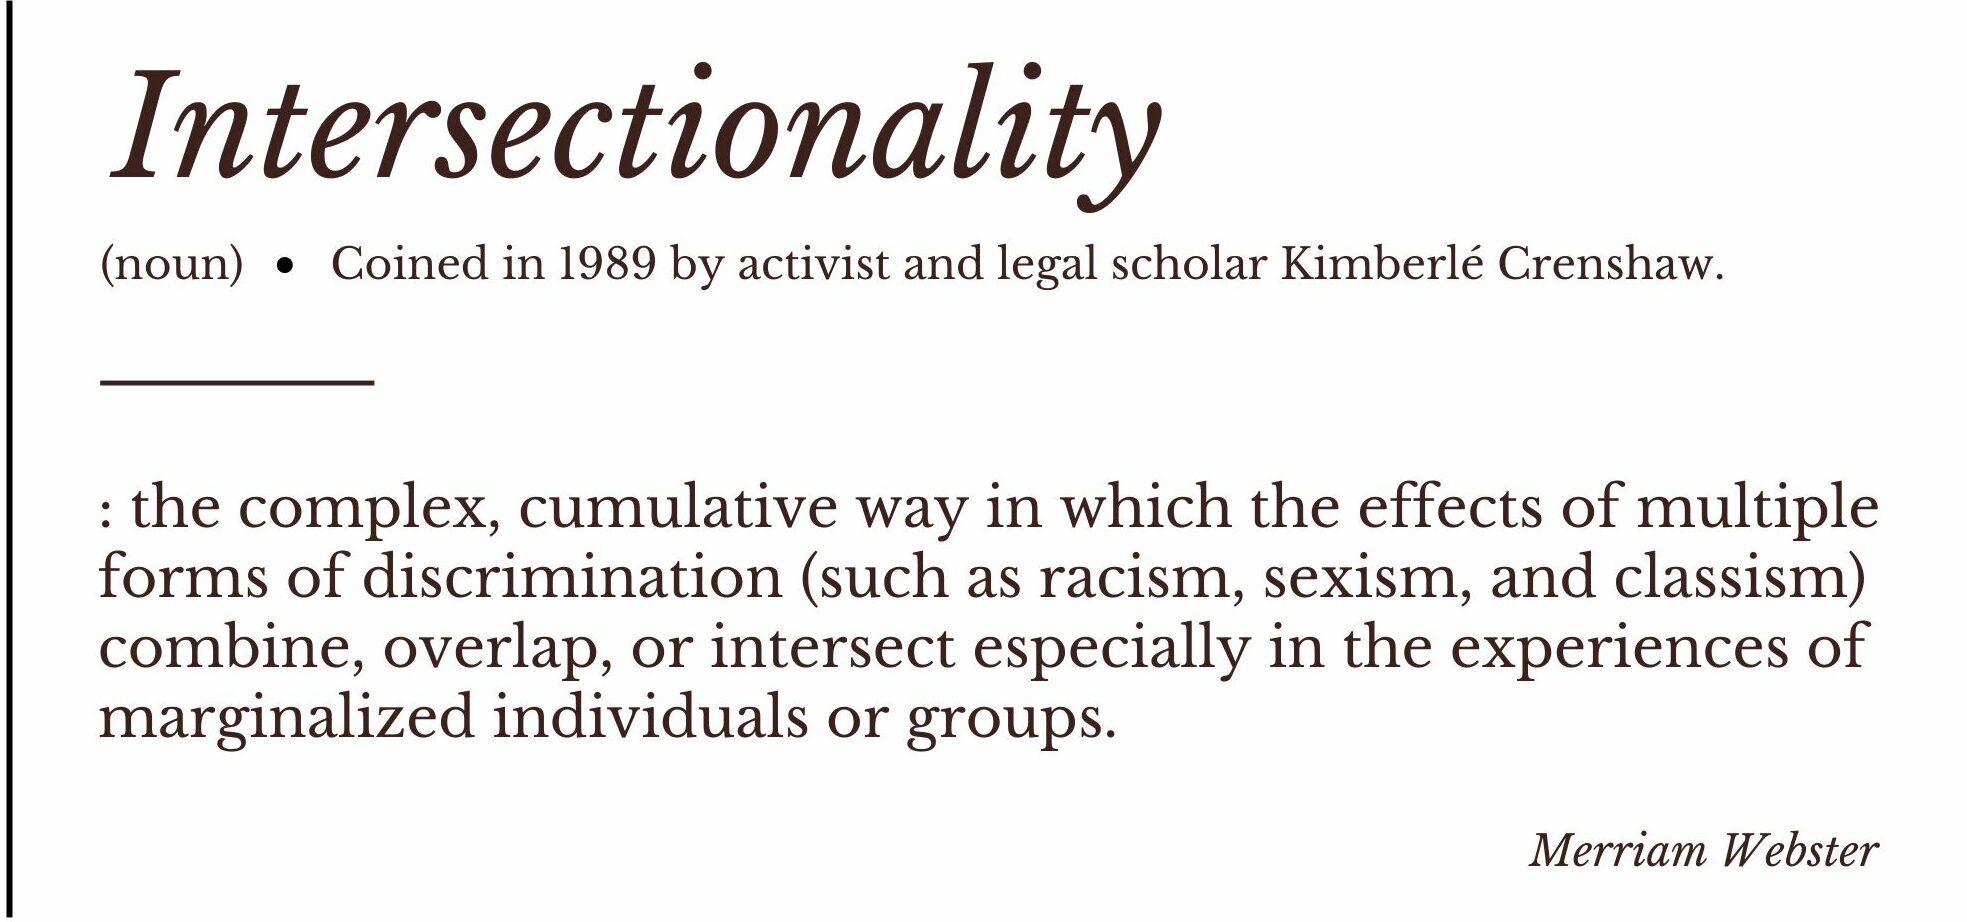 Definition of Intersectionality.